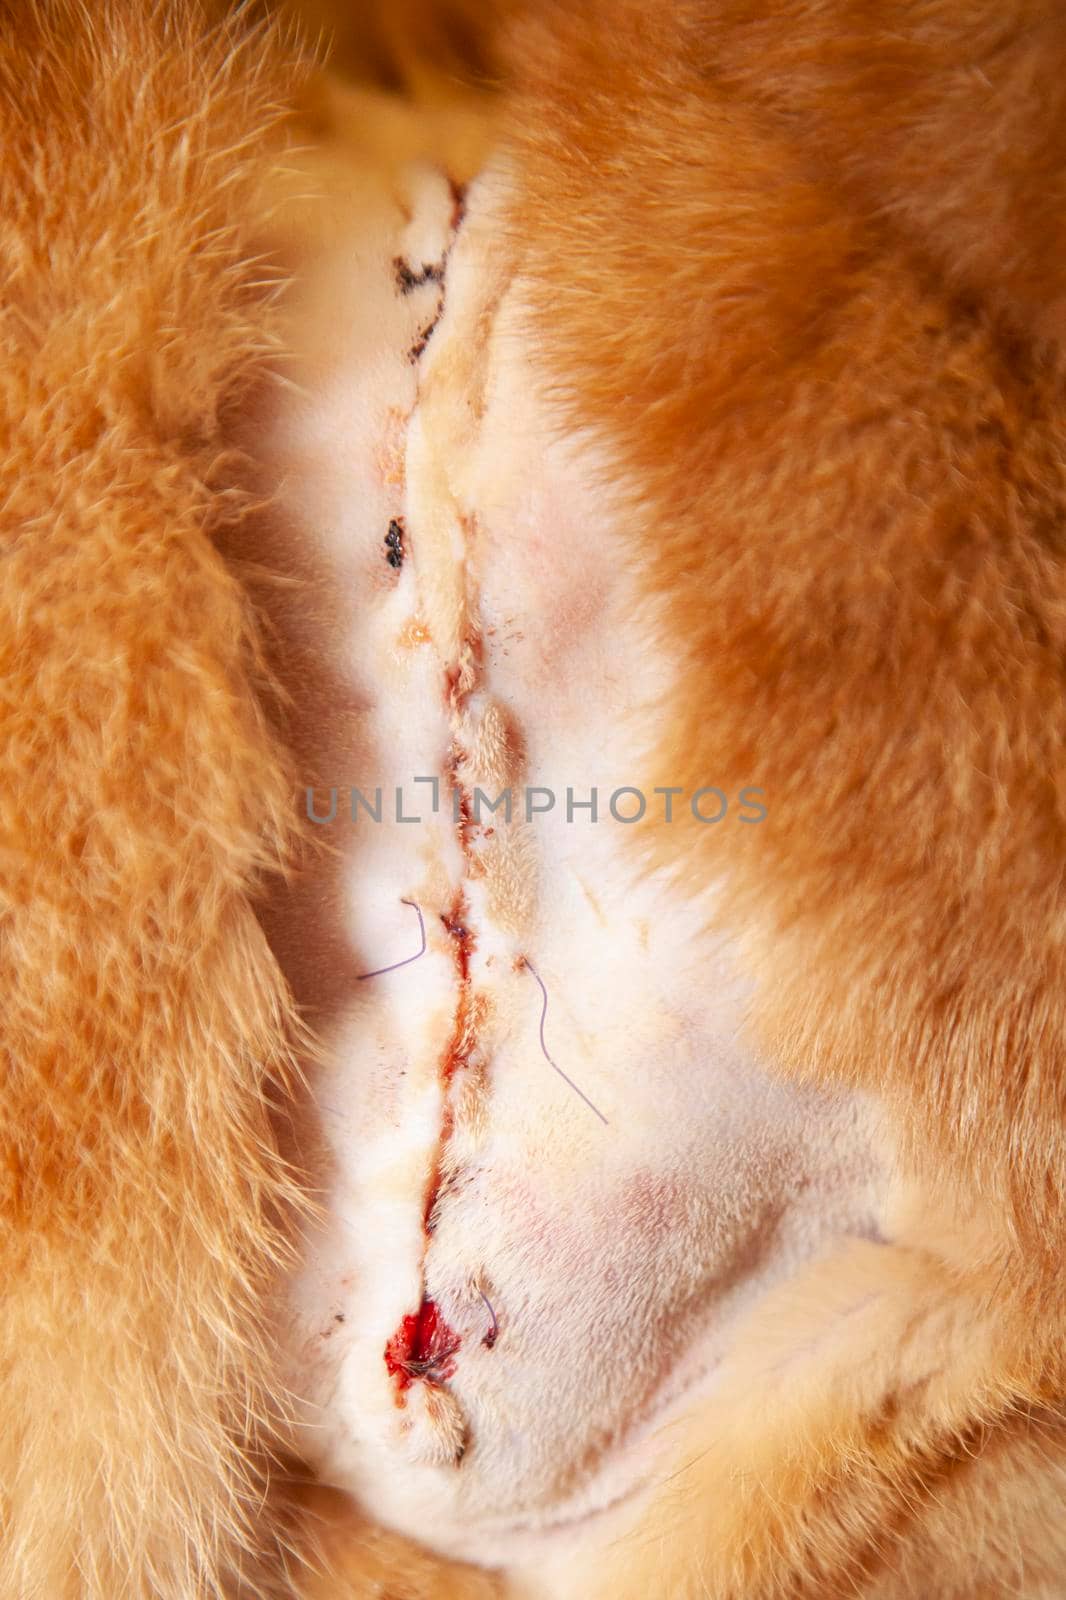 Surgical Cut on a Cat by tornado98